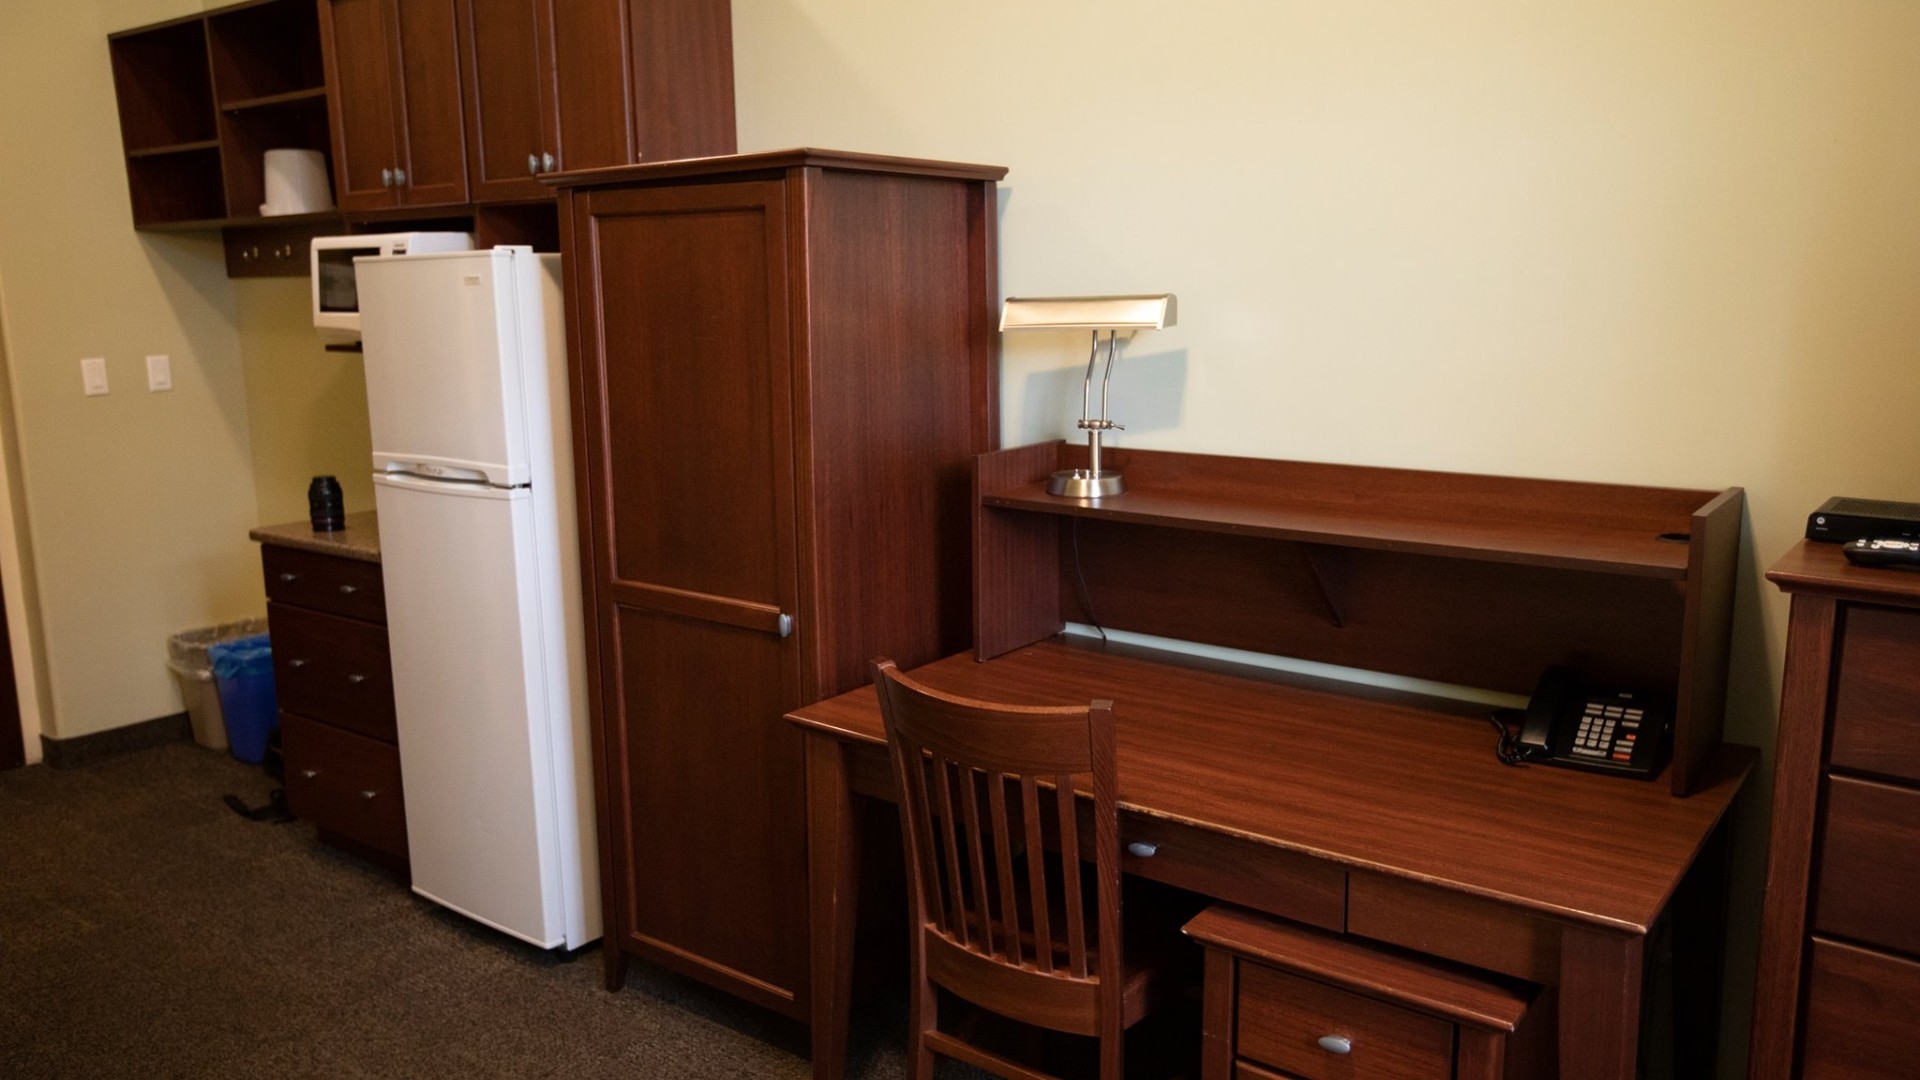 Governors Hall single suite with a desk, fridge and storage space.